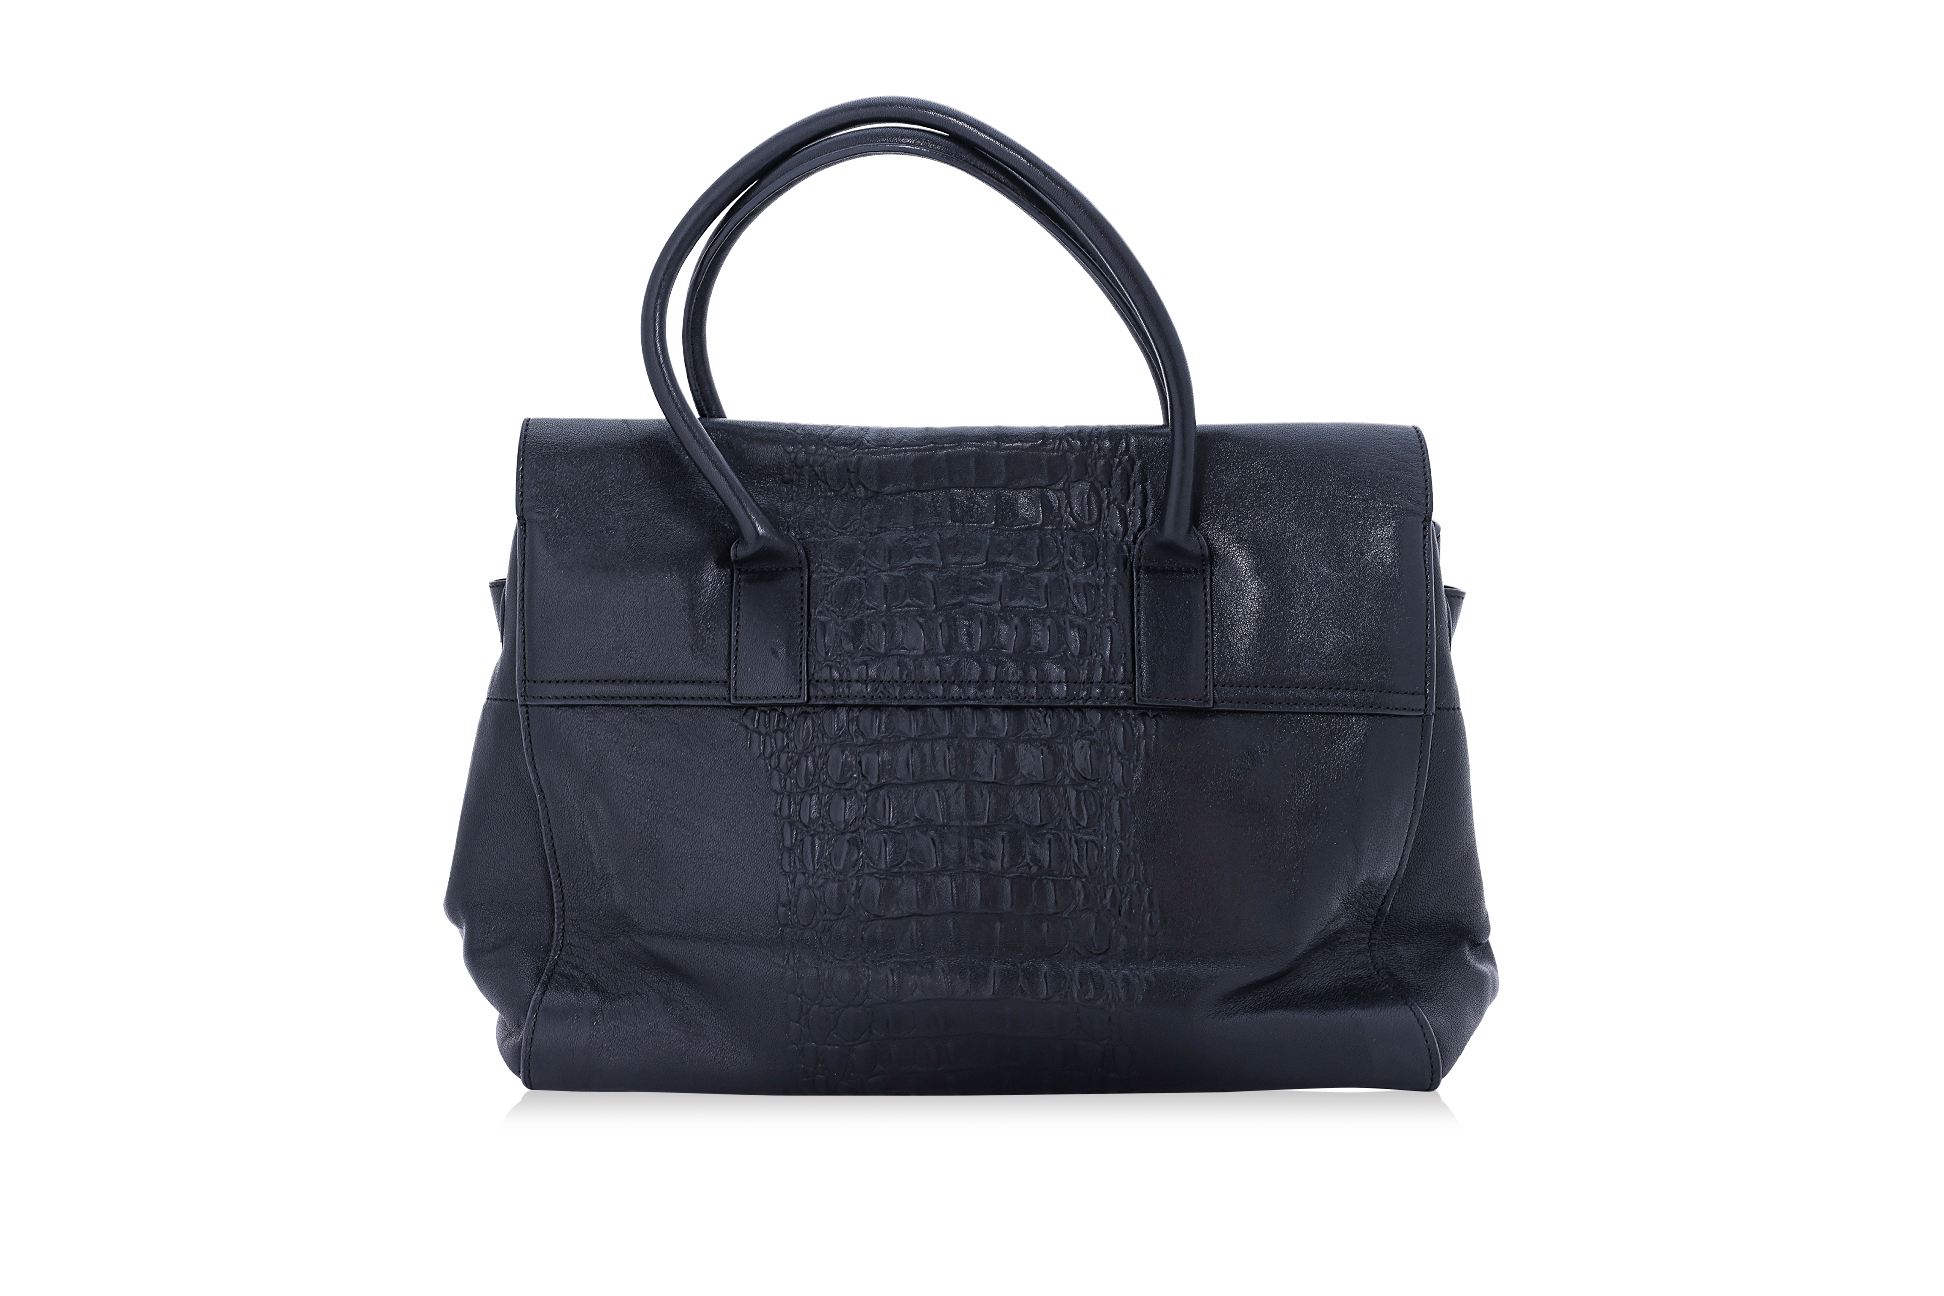 A MULBERRY BLACK LEATHER BAG - Image 2 of 2